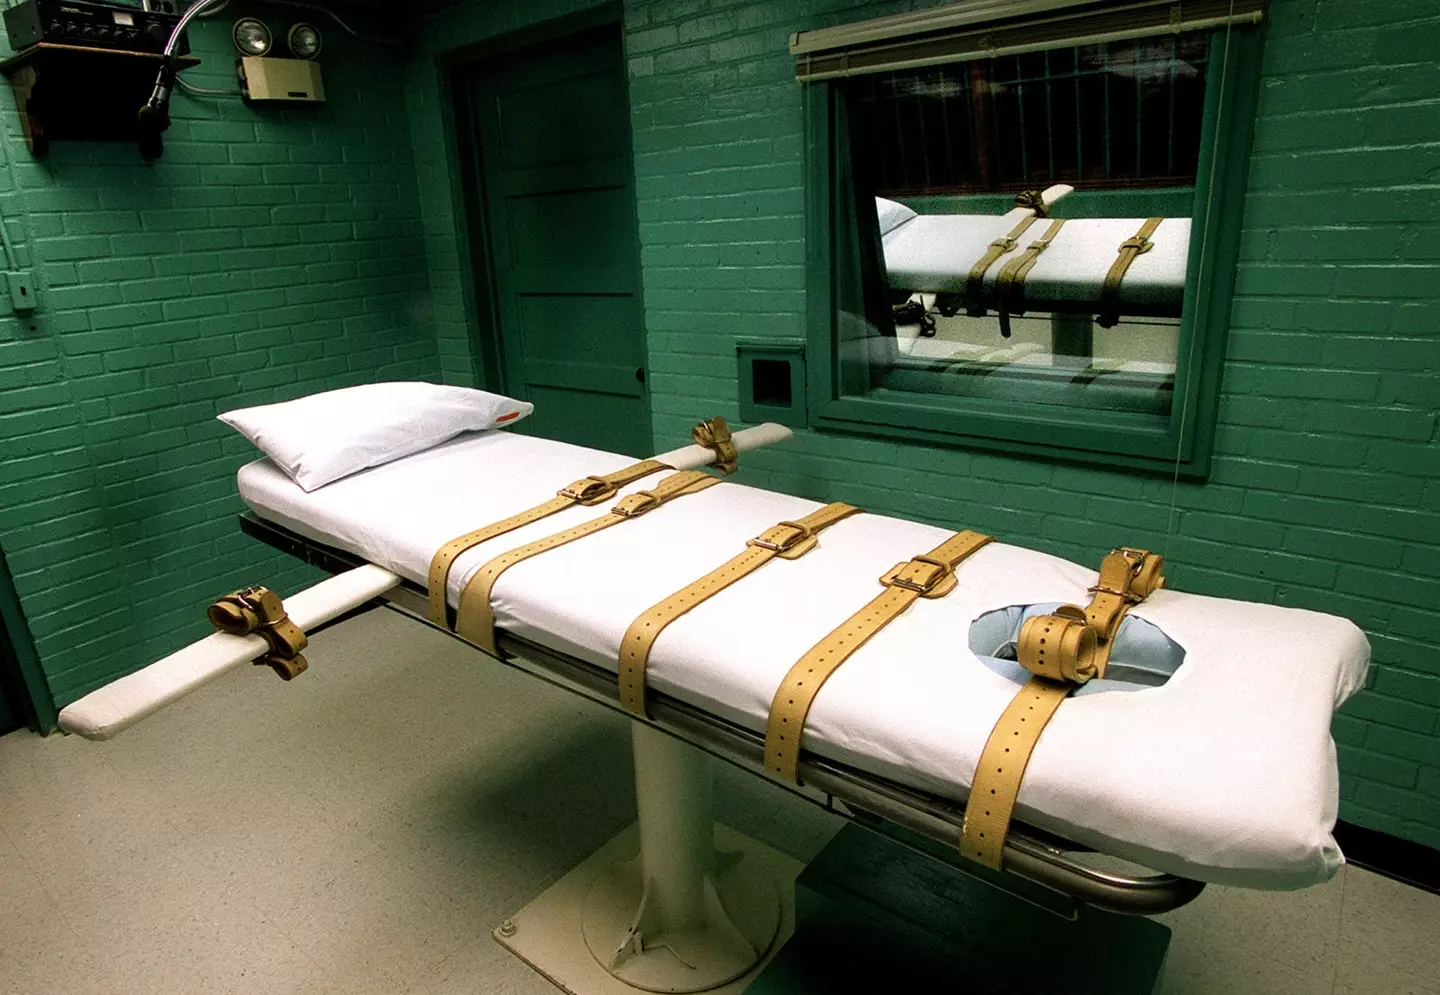 The world’s oldest death row inmate is due to be executed by lethal injection on Thursday.